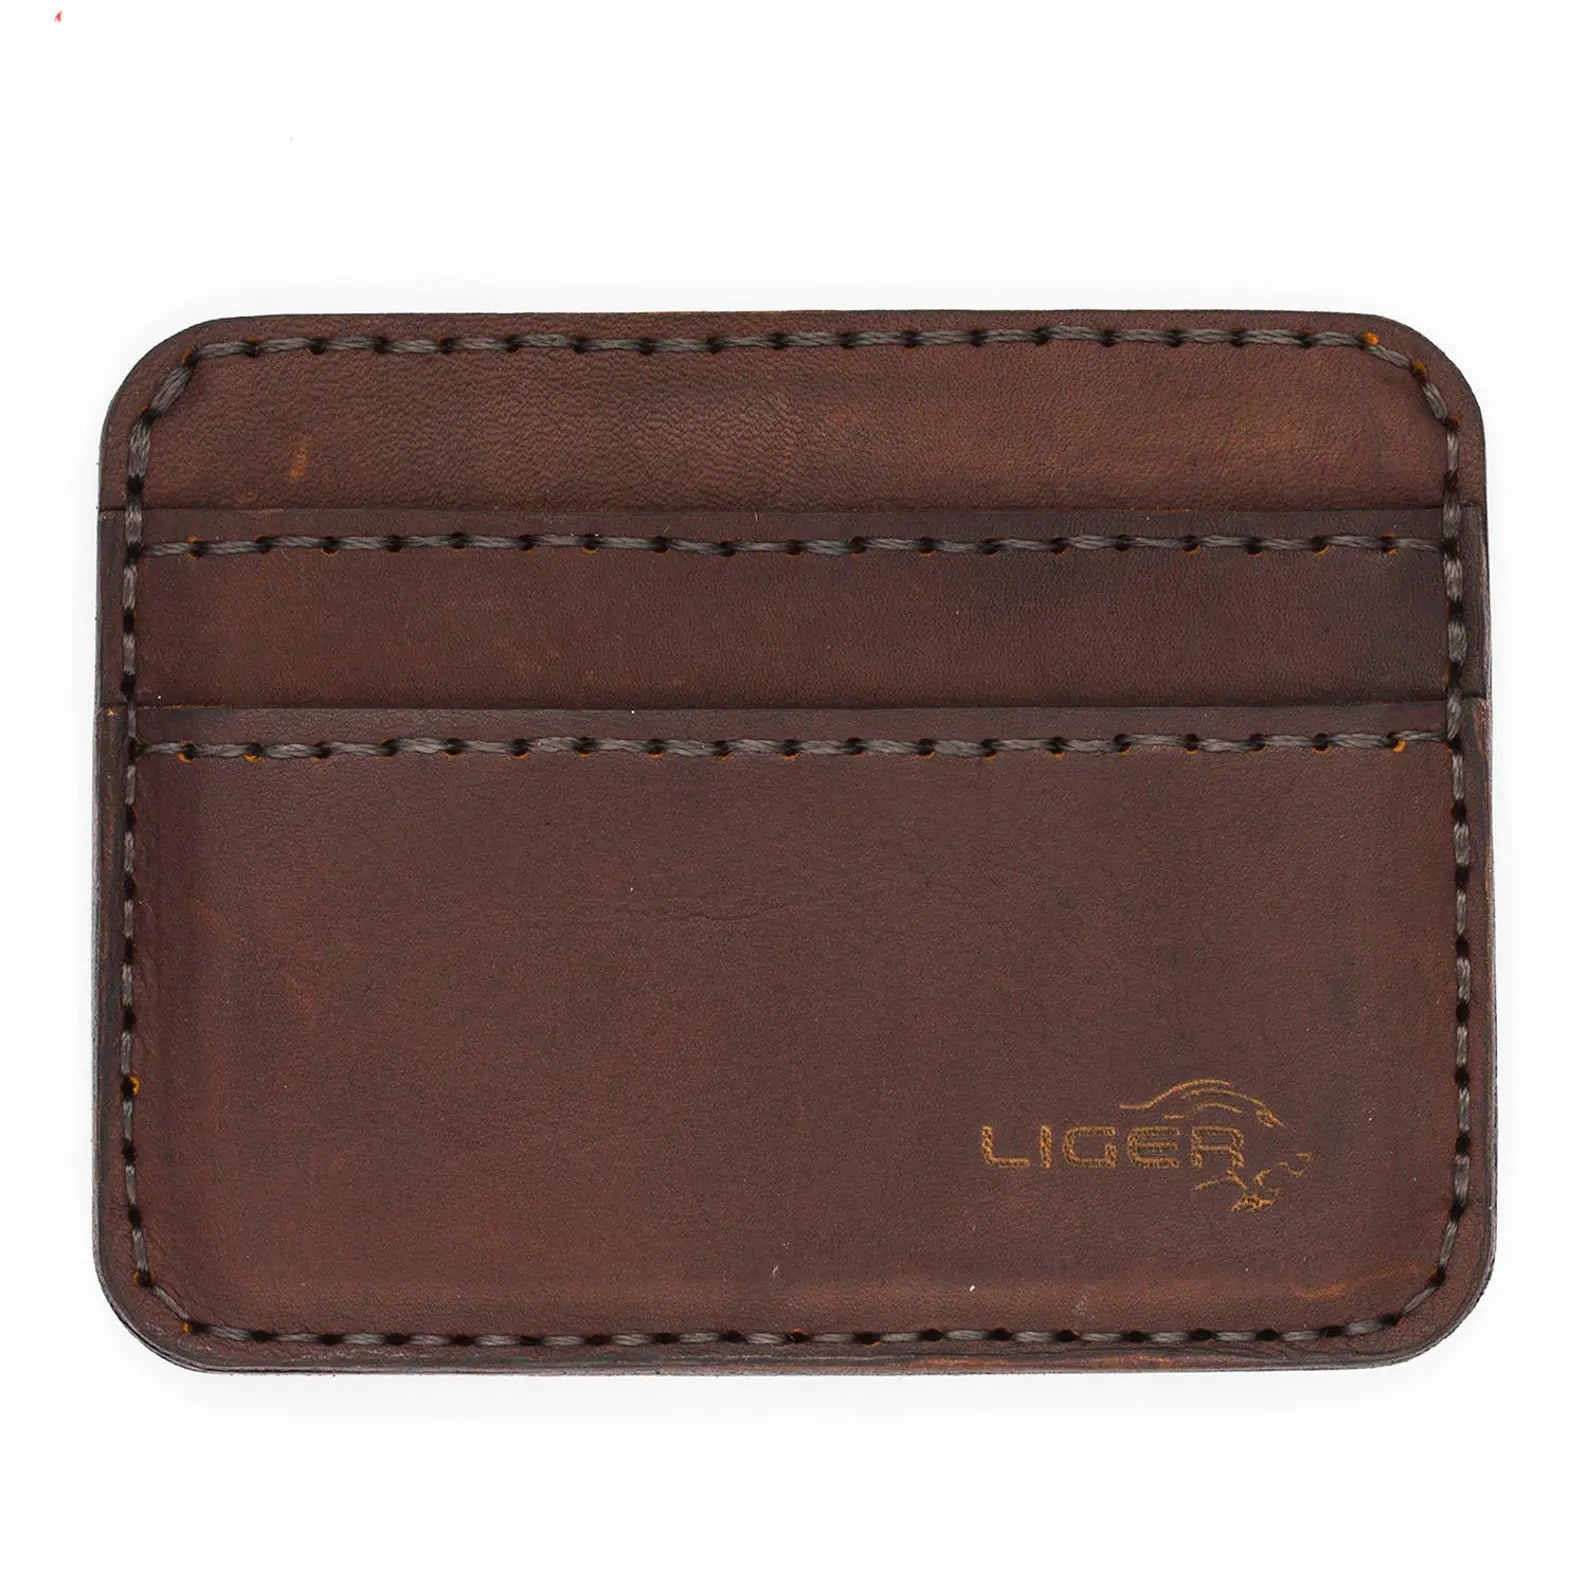 Handcrafted leather Wallet